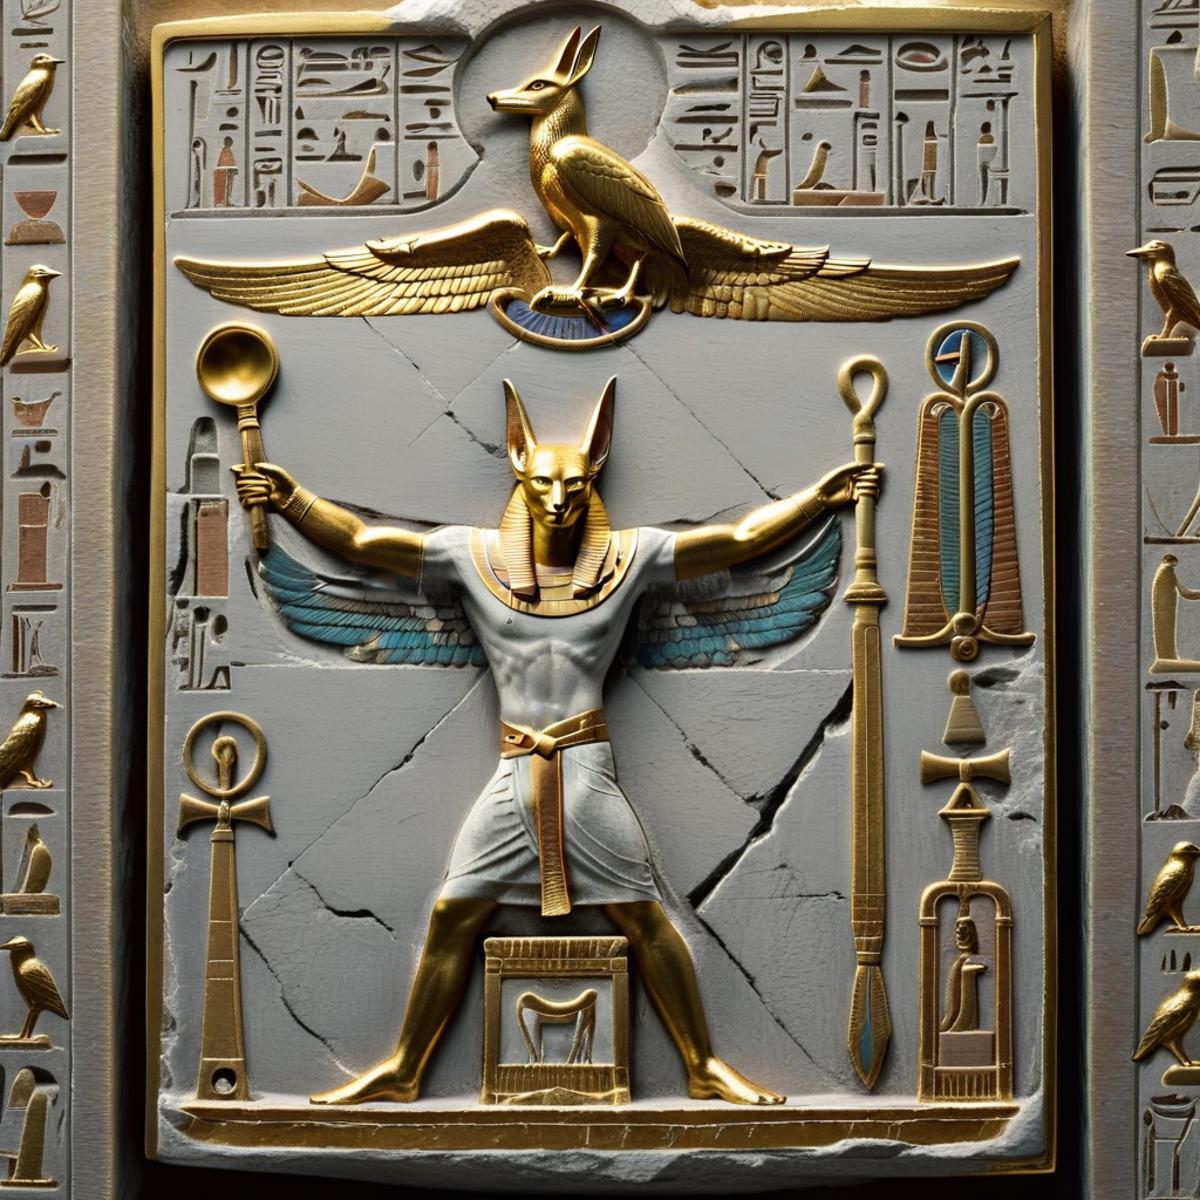 Ancient Egyptian Artwork: A Gold Statue of a Man with a Bird and a Scepter